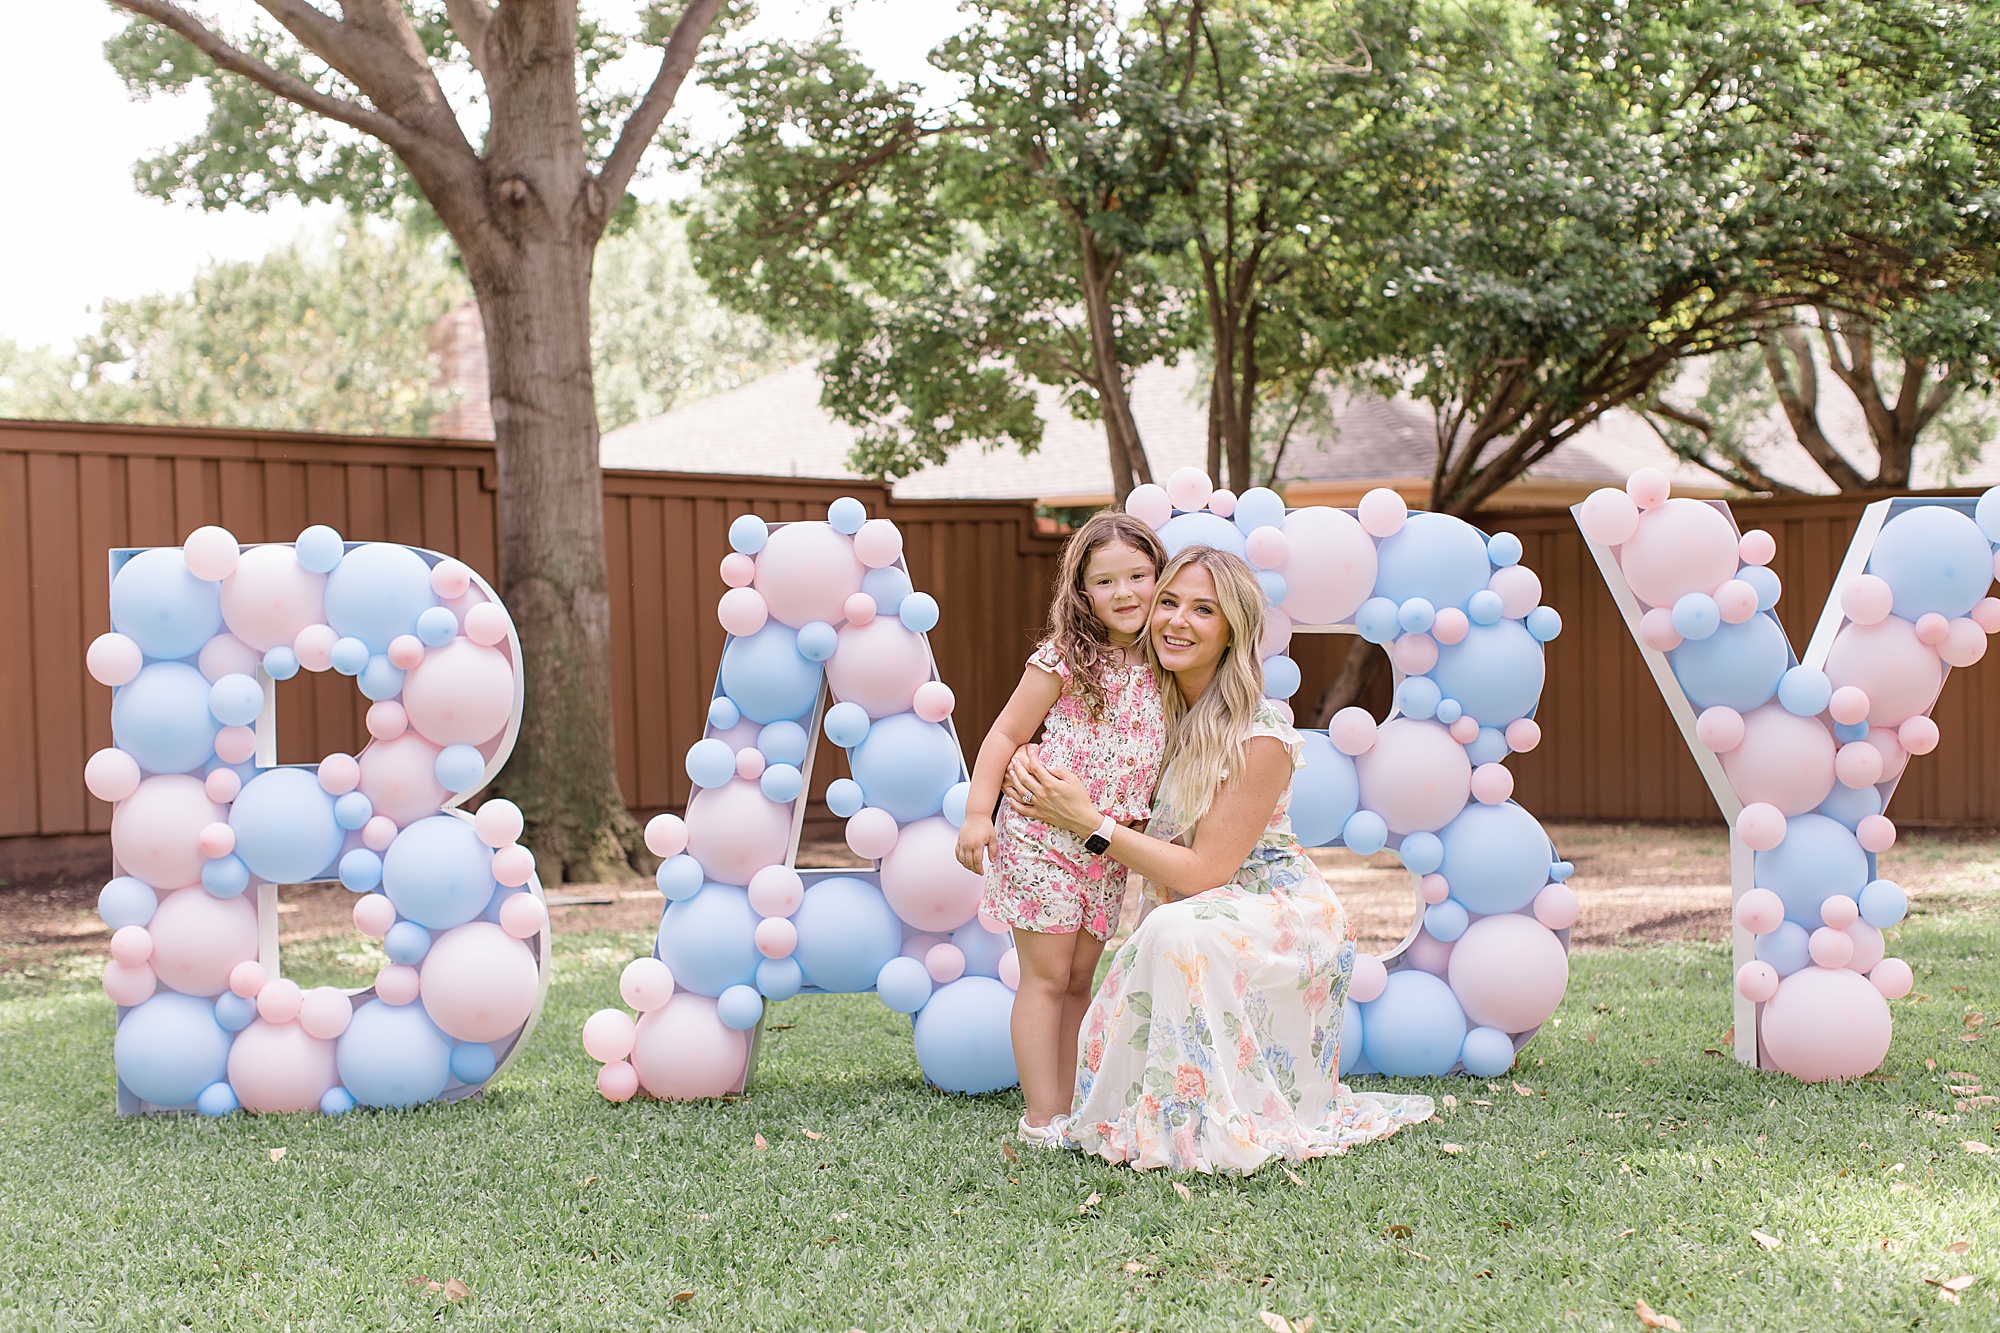 woman poses with girl during gender reveal party